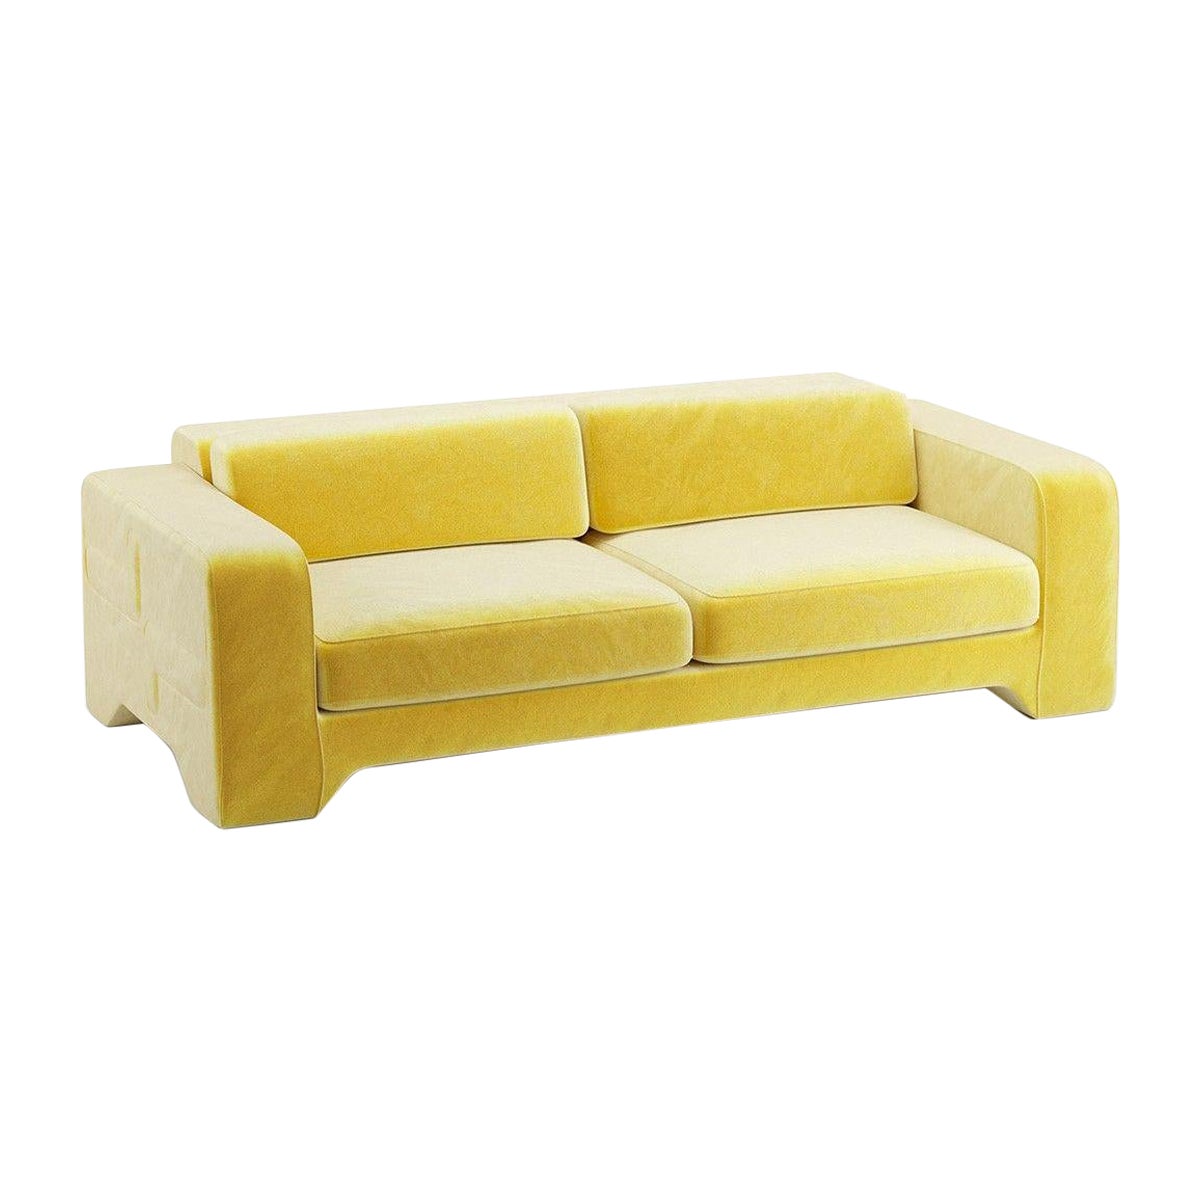 Popus Editions Giovanna 4 Seater Sofa in Yellow Como Velvet Upholstery